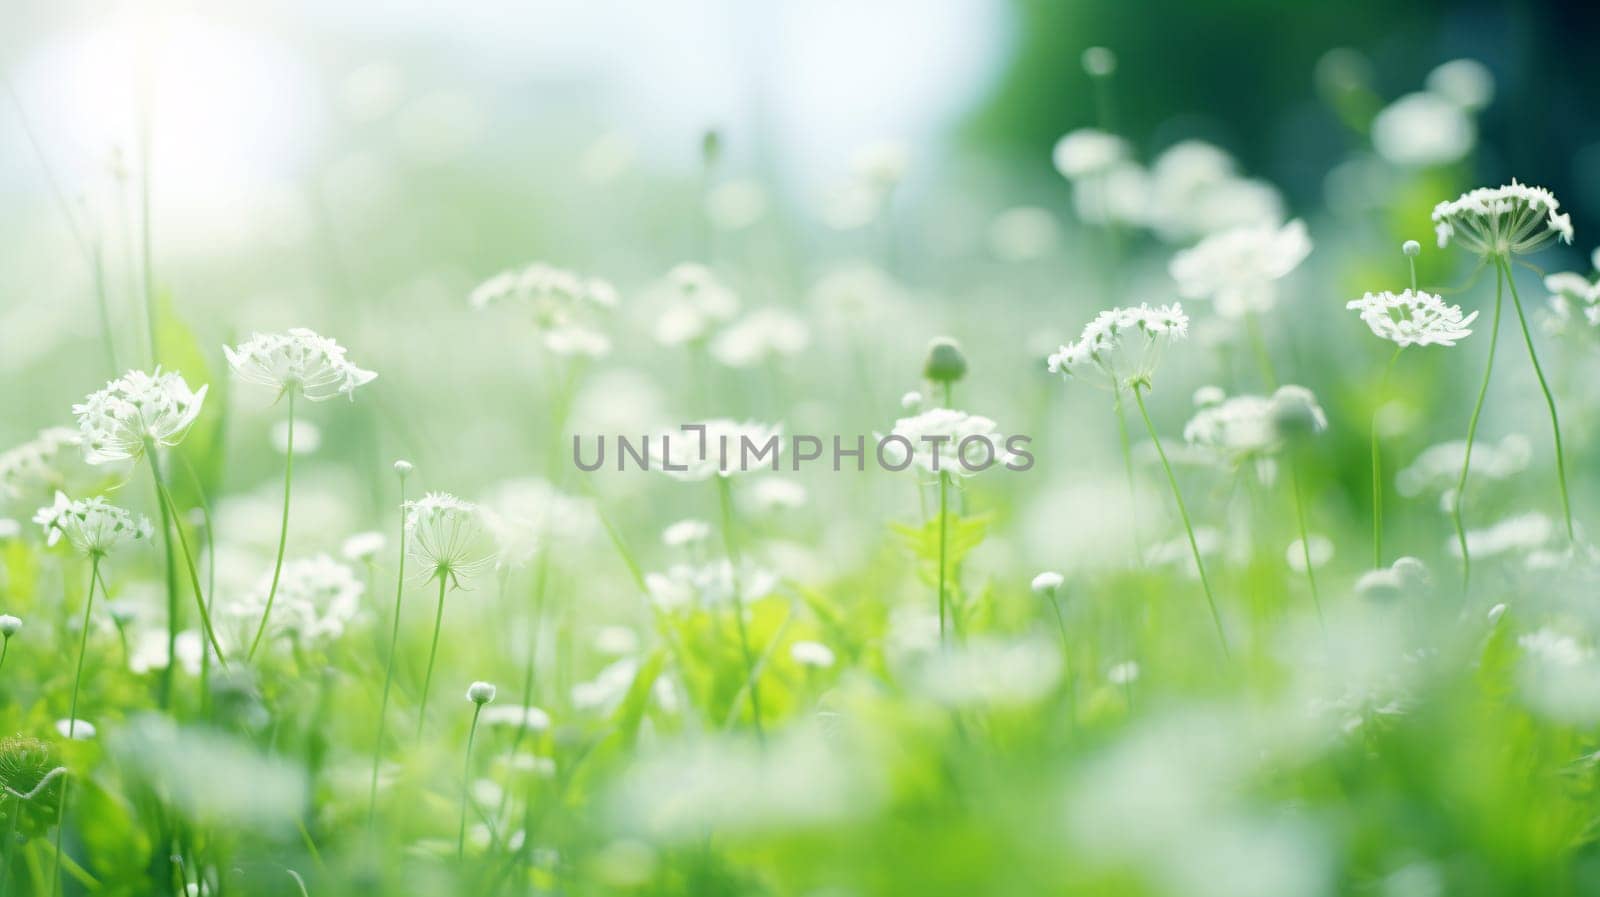 Wildflowers in fresh grass against blurred background - Ecology concept by chrisroll